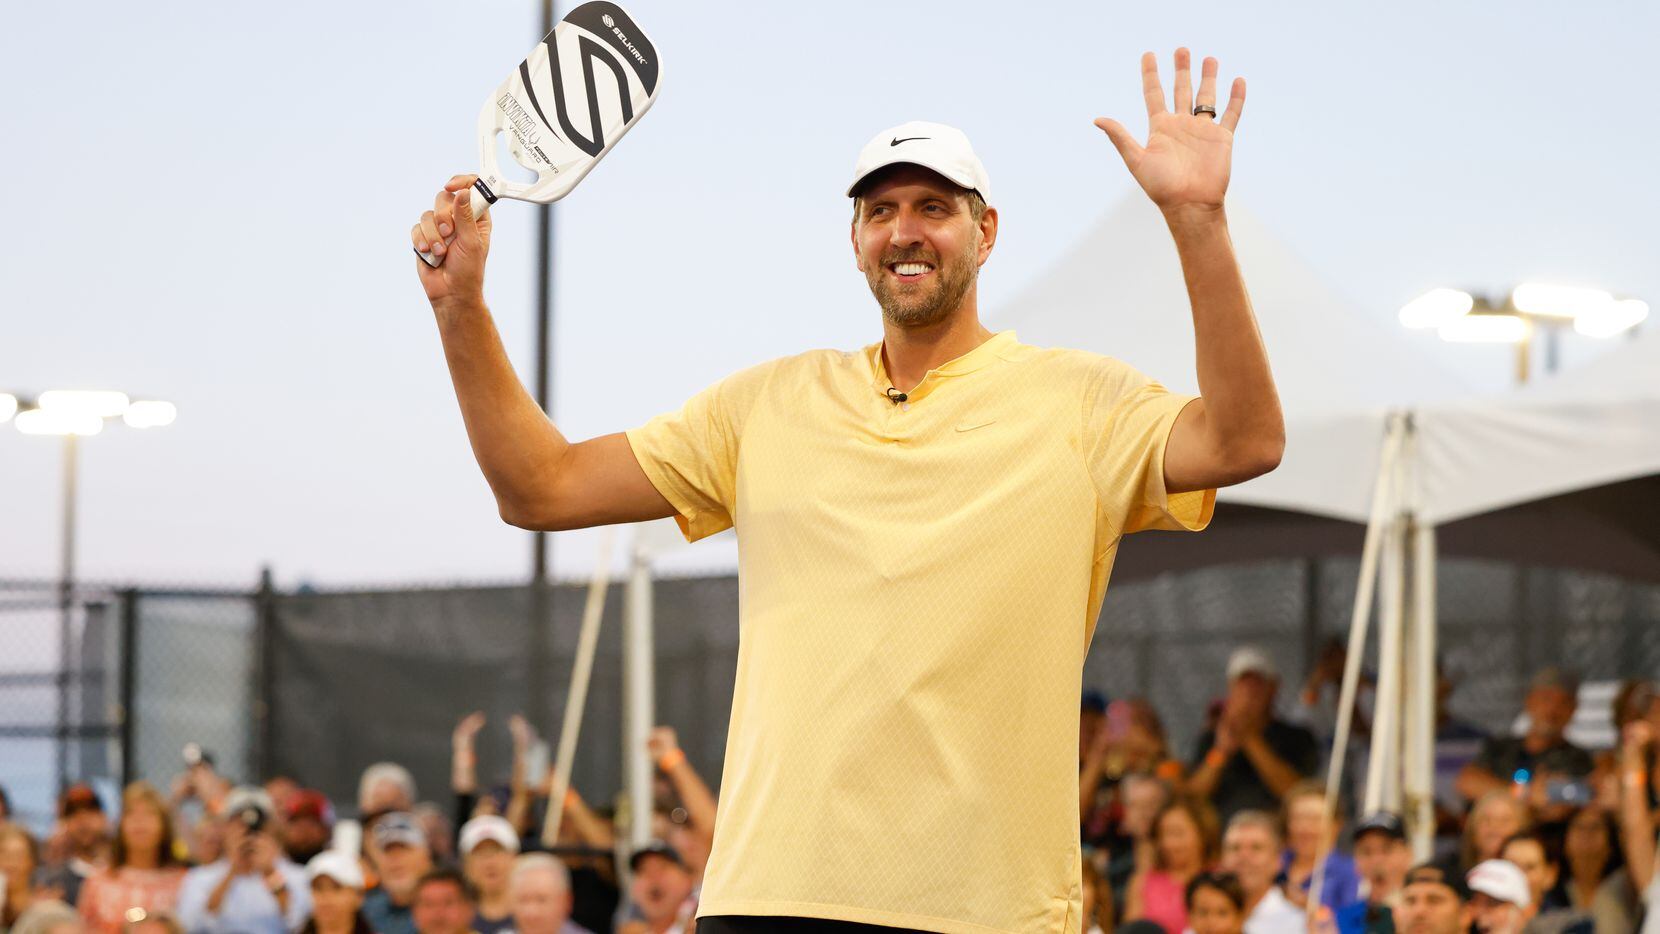 Dirk Nowitzki raises his arms as he is announced to the crowd as a pickleball player in the...